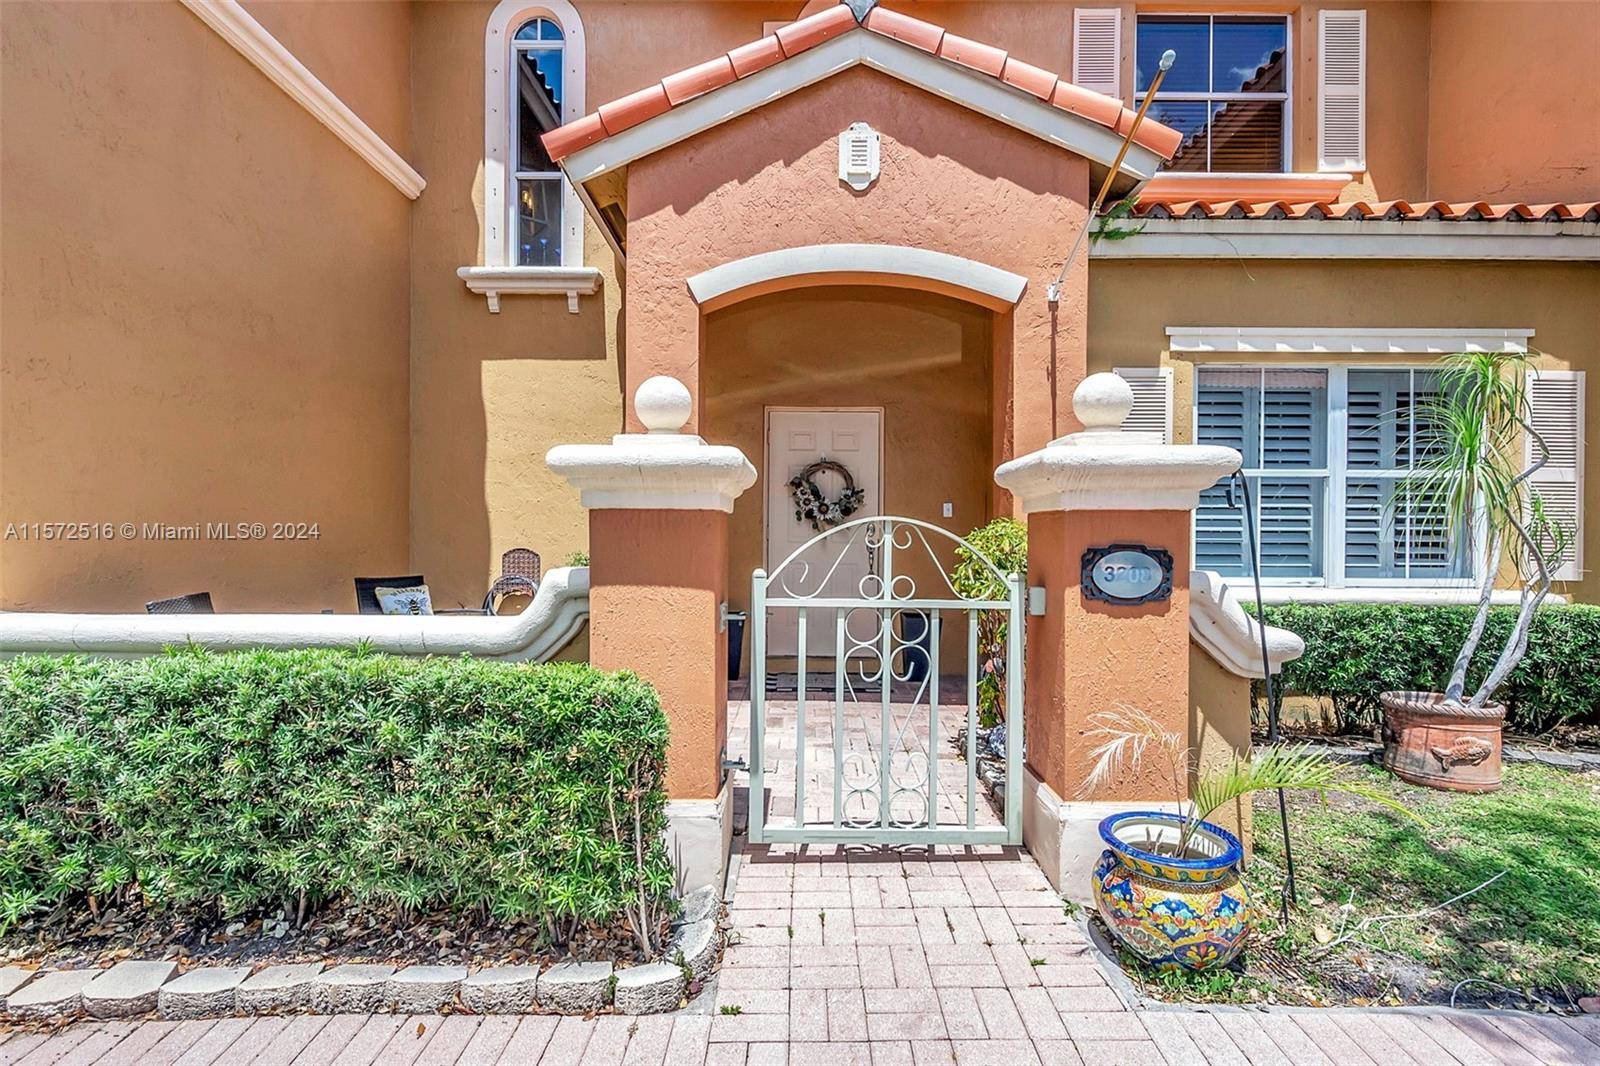 AWESOME OPPORTUNITY TO LIVE IN HIGHLY DESIRED GATED COMMUNITY OF VILLA VIZCAYA IN MIAMI LAKES.